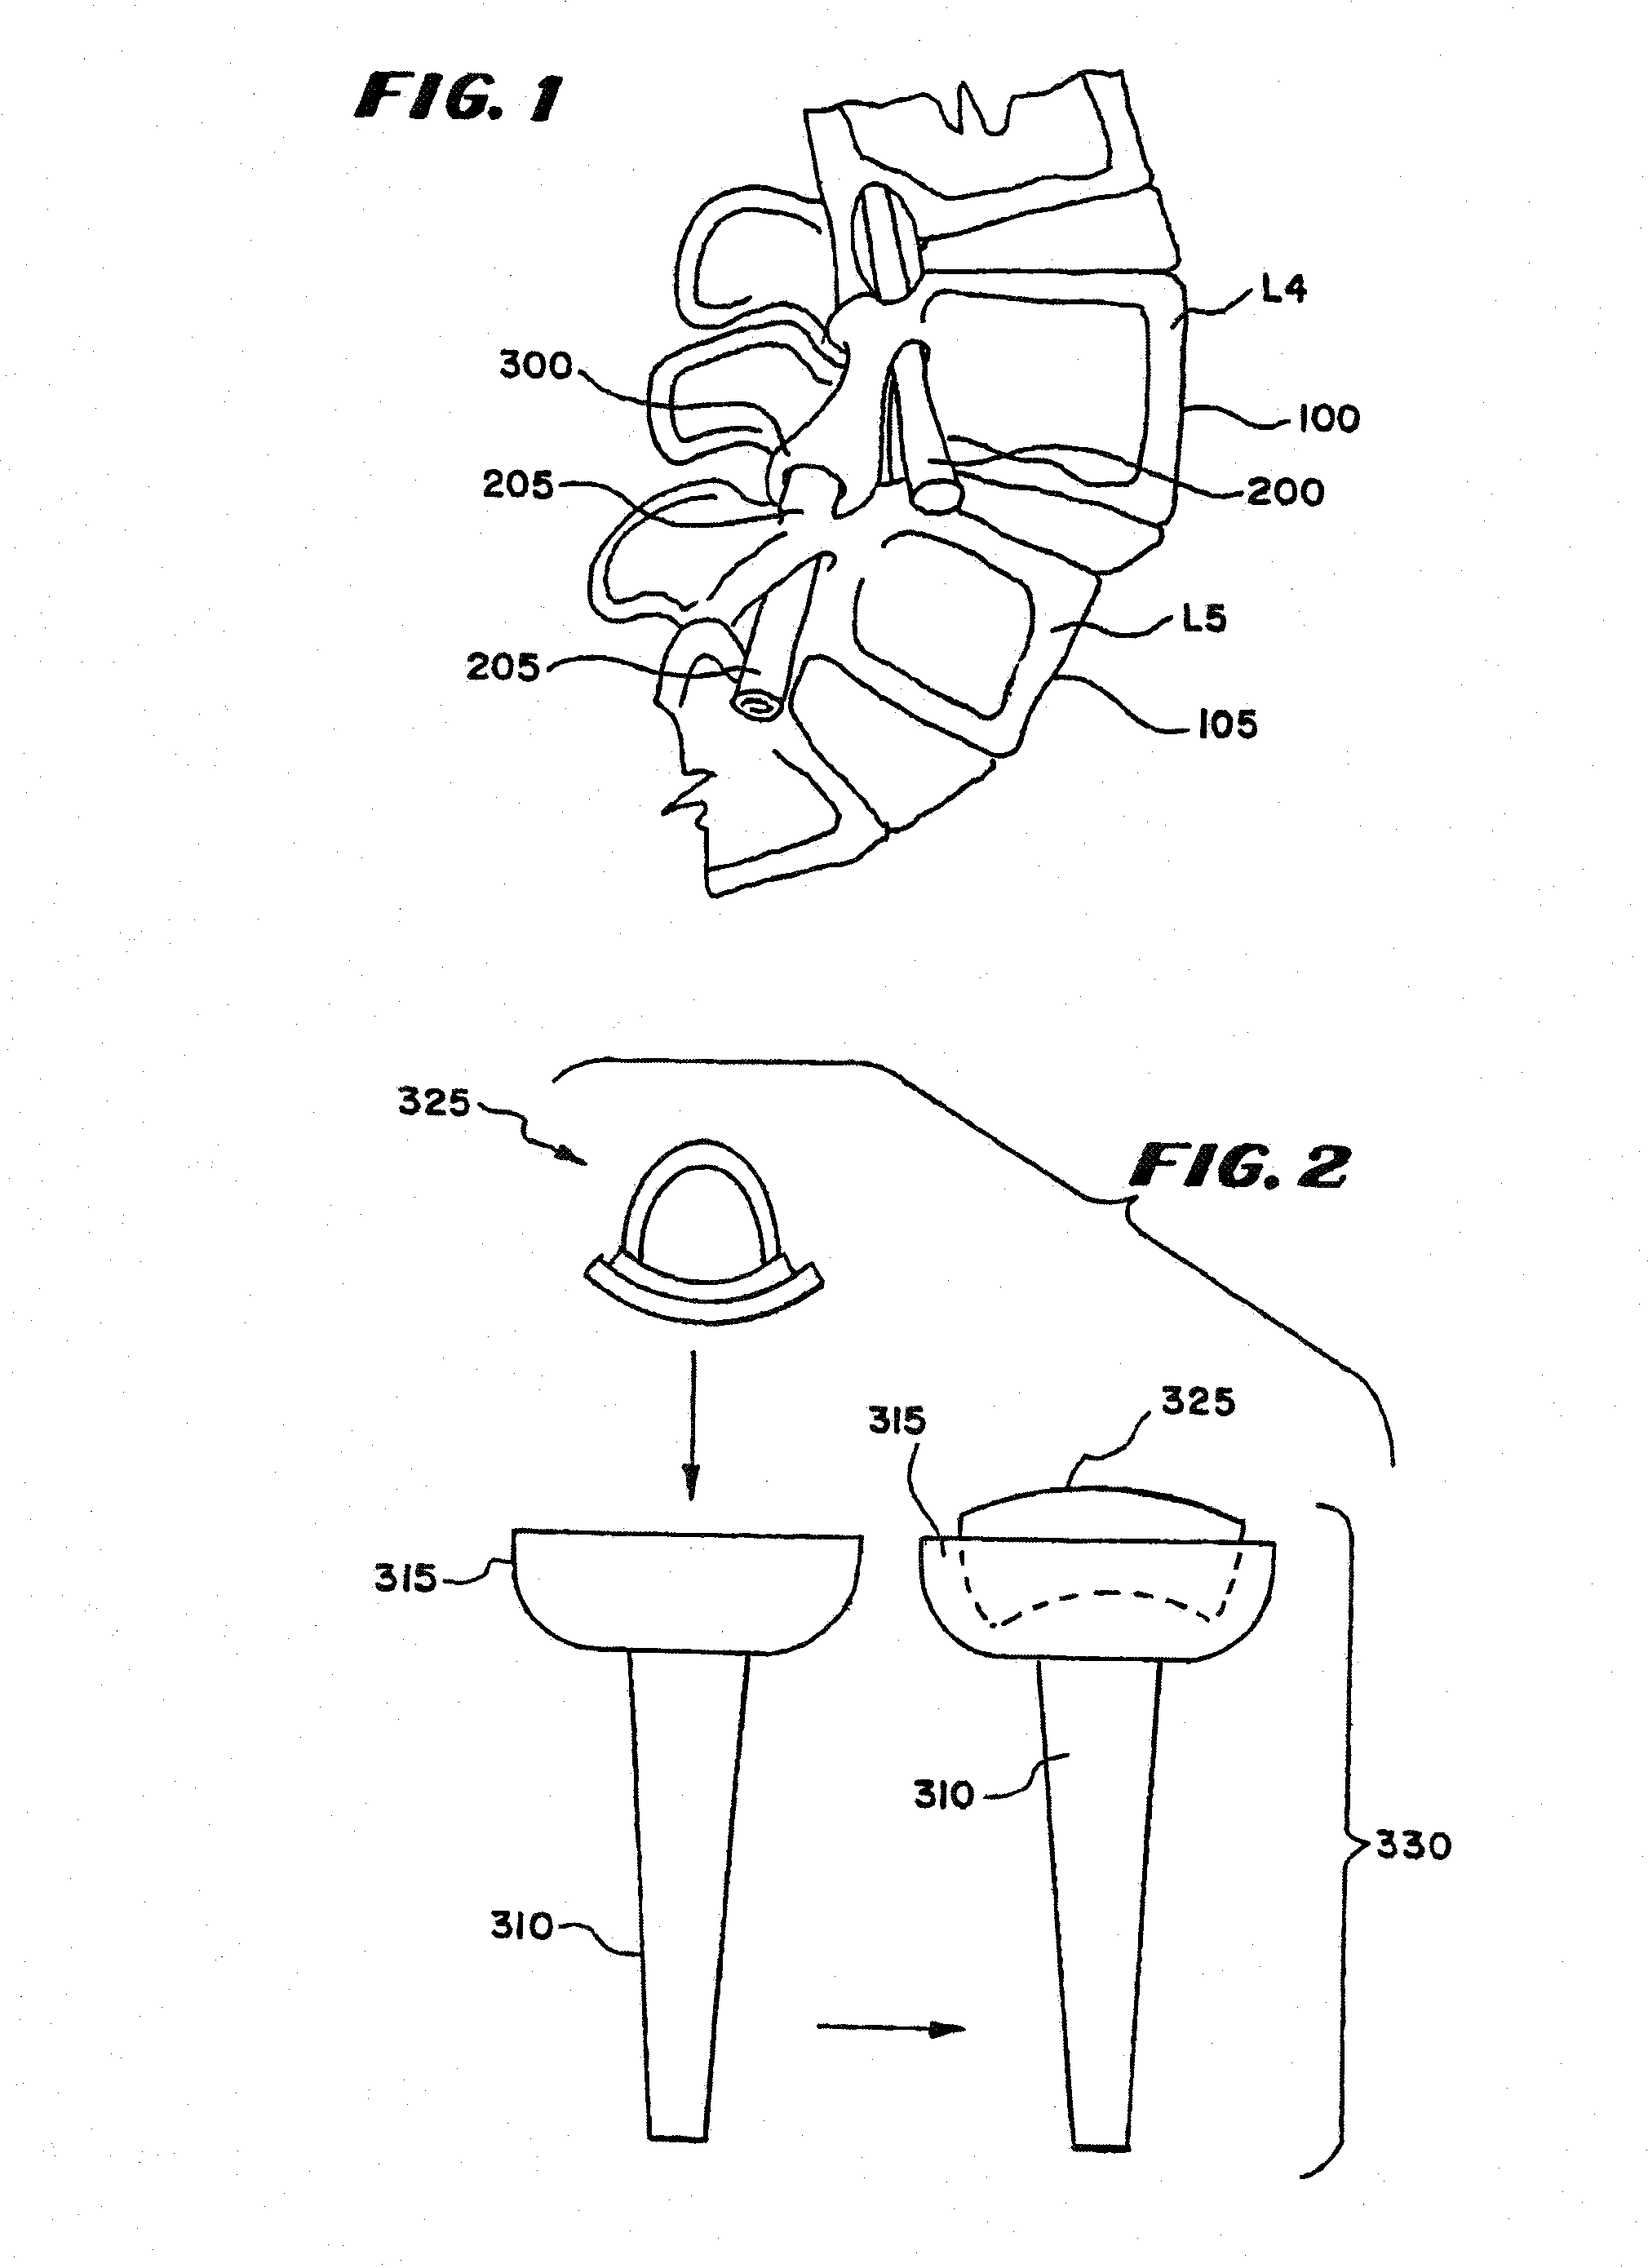 Facet arthroplasty devices and methods